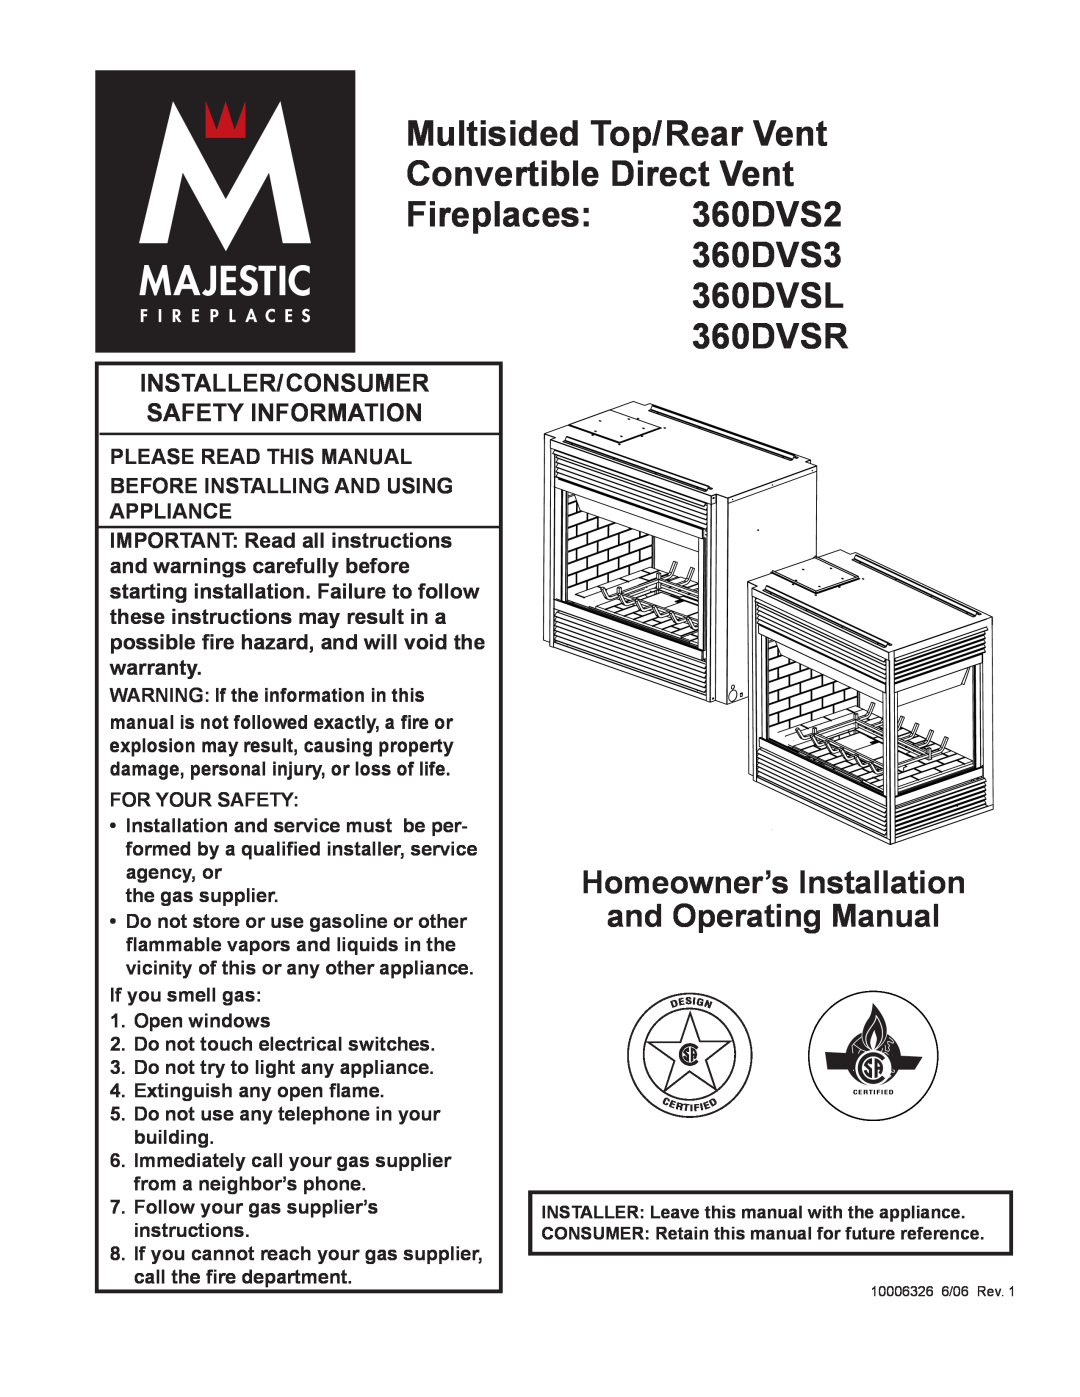 Vermont Casting warranty Please Read This Manual Before Installing And Using Appliance, 360DVS3 360DVSL 360DVSR 